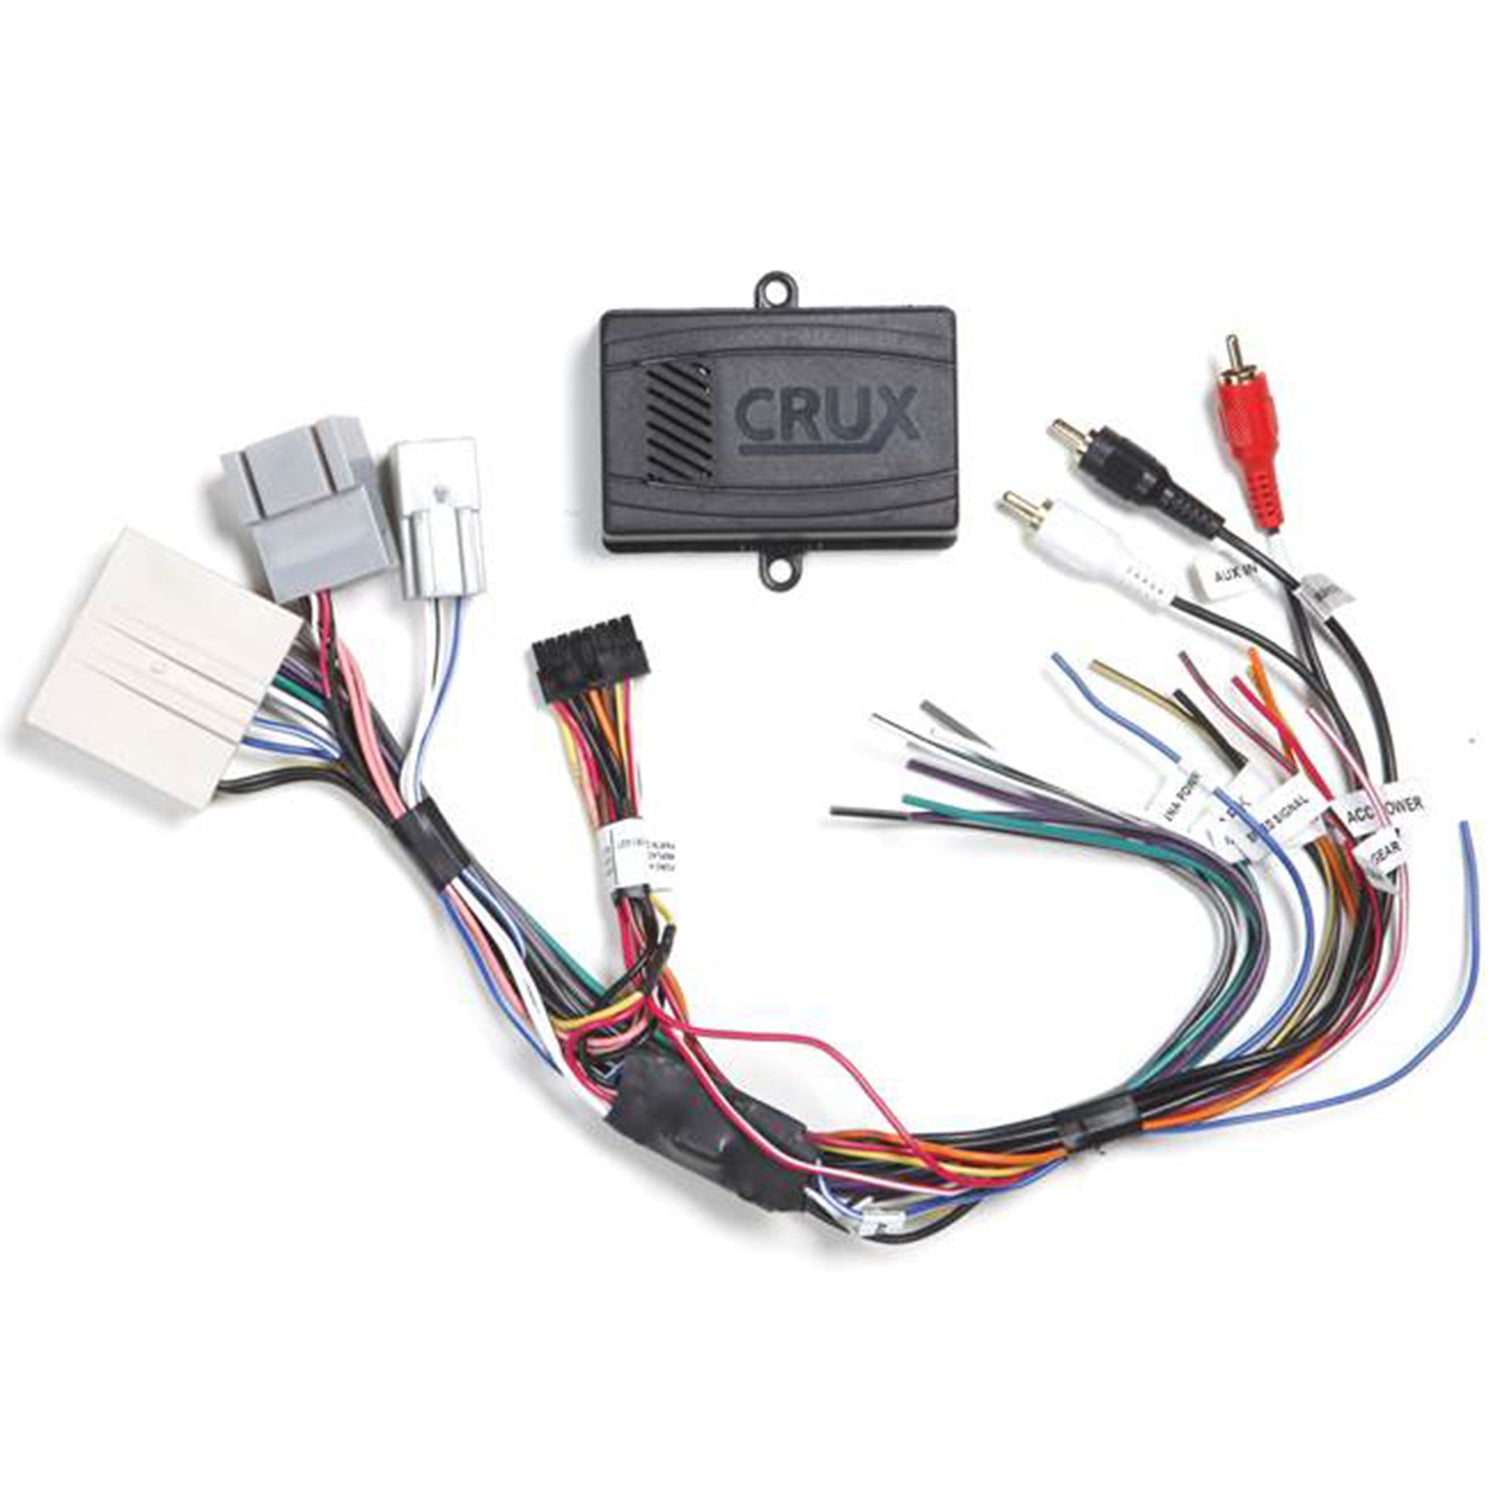 Crux SOOFD-27 Radio Replacement Interface For 2005-Up Ford Lincoln Mercury